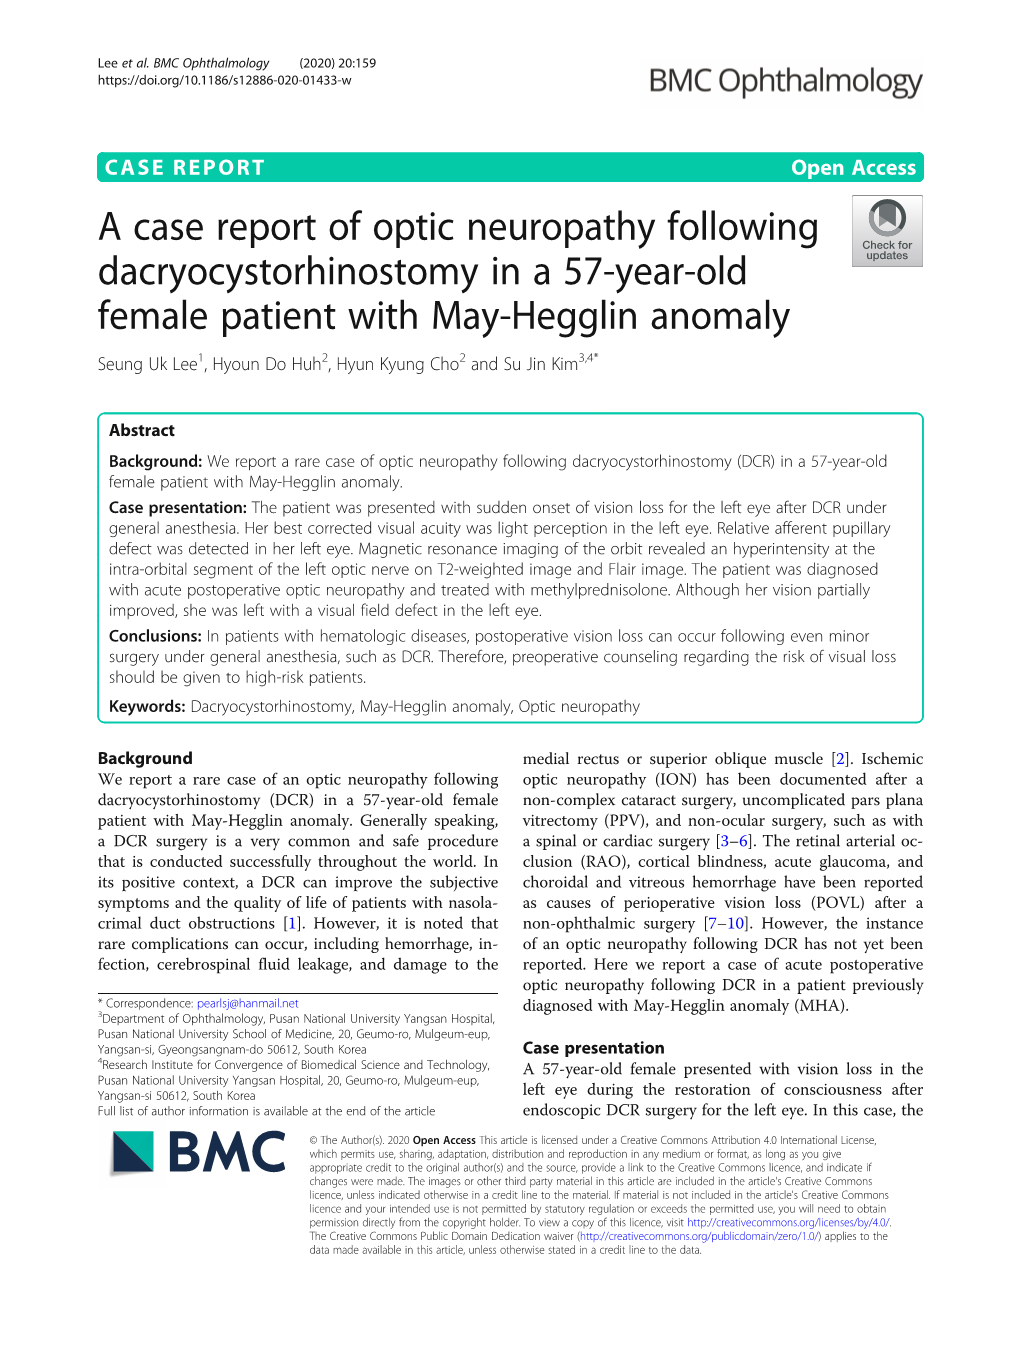 A Case Report of Optic Neuropathy Following Dacryocystorhinostomy in a 57-Year-Old Female Patient with May-Hegglin Anomaly